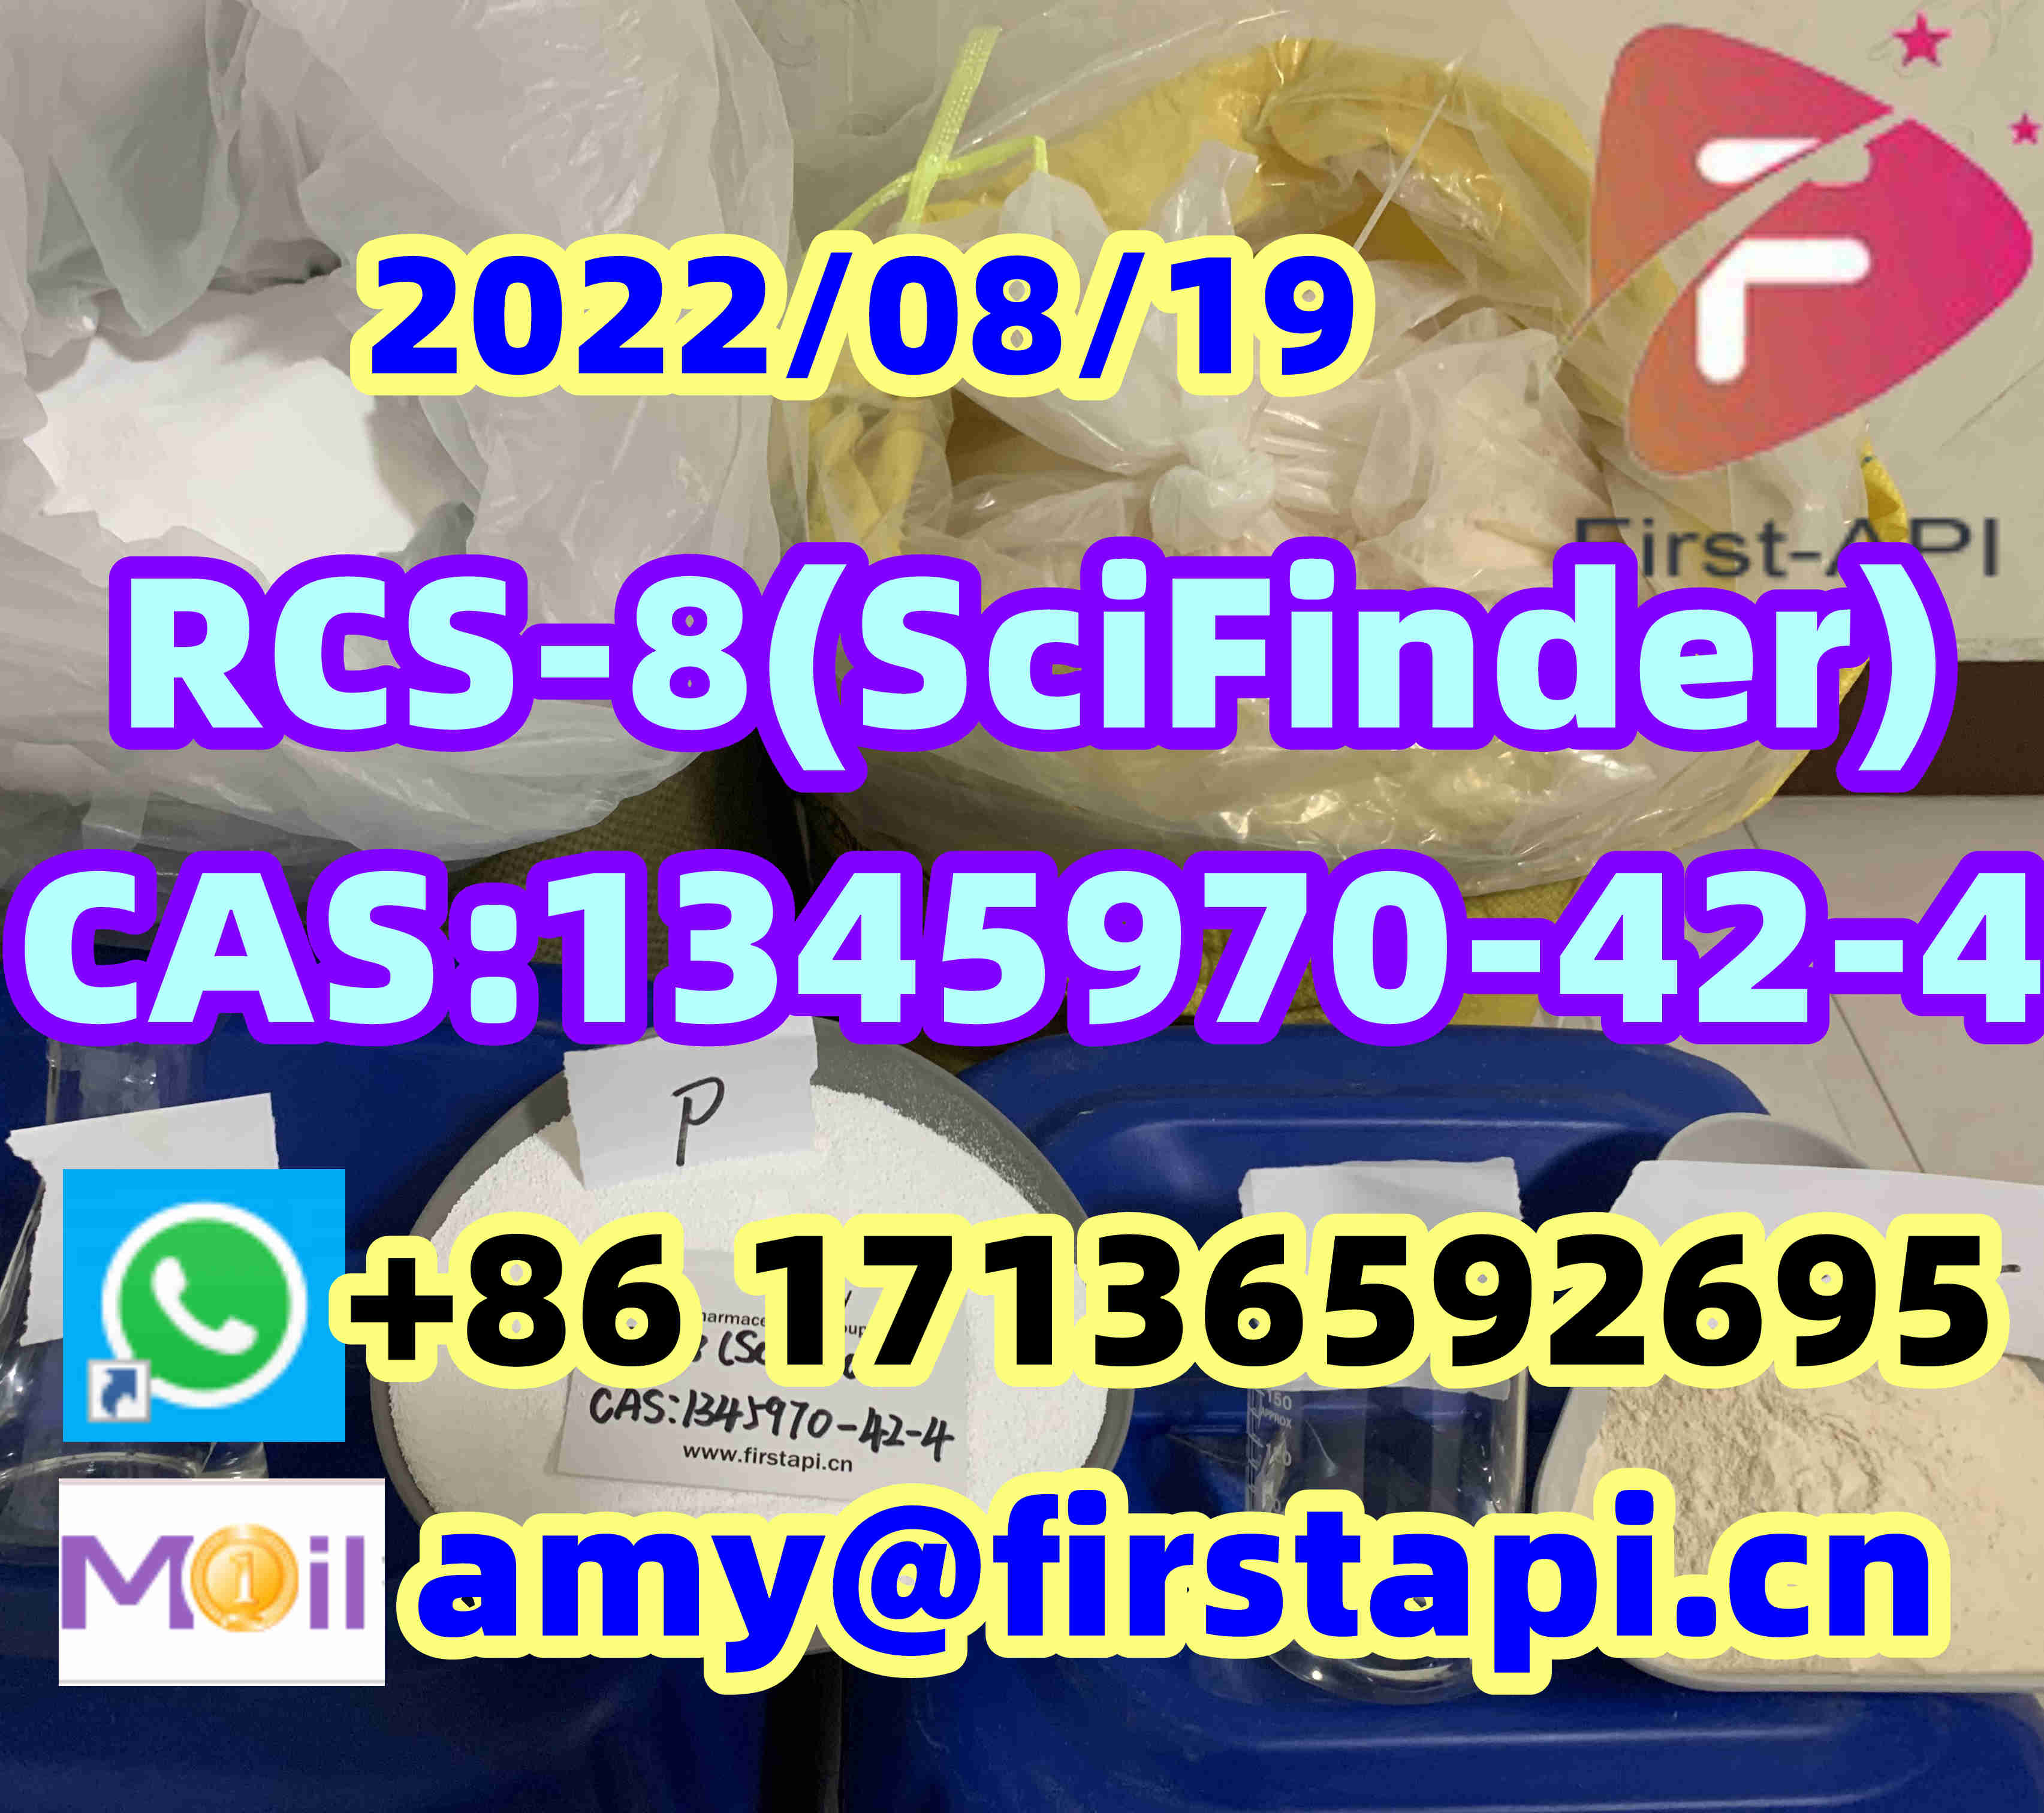 CAS:1345970-42-4,RCS-8(SciFinder),high quality,low price,fast delivery - photo